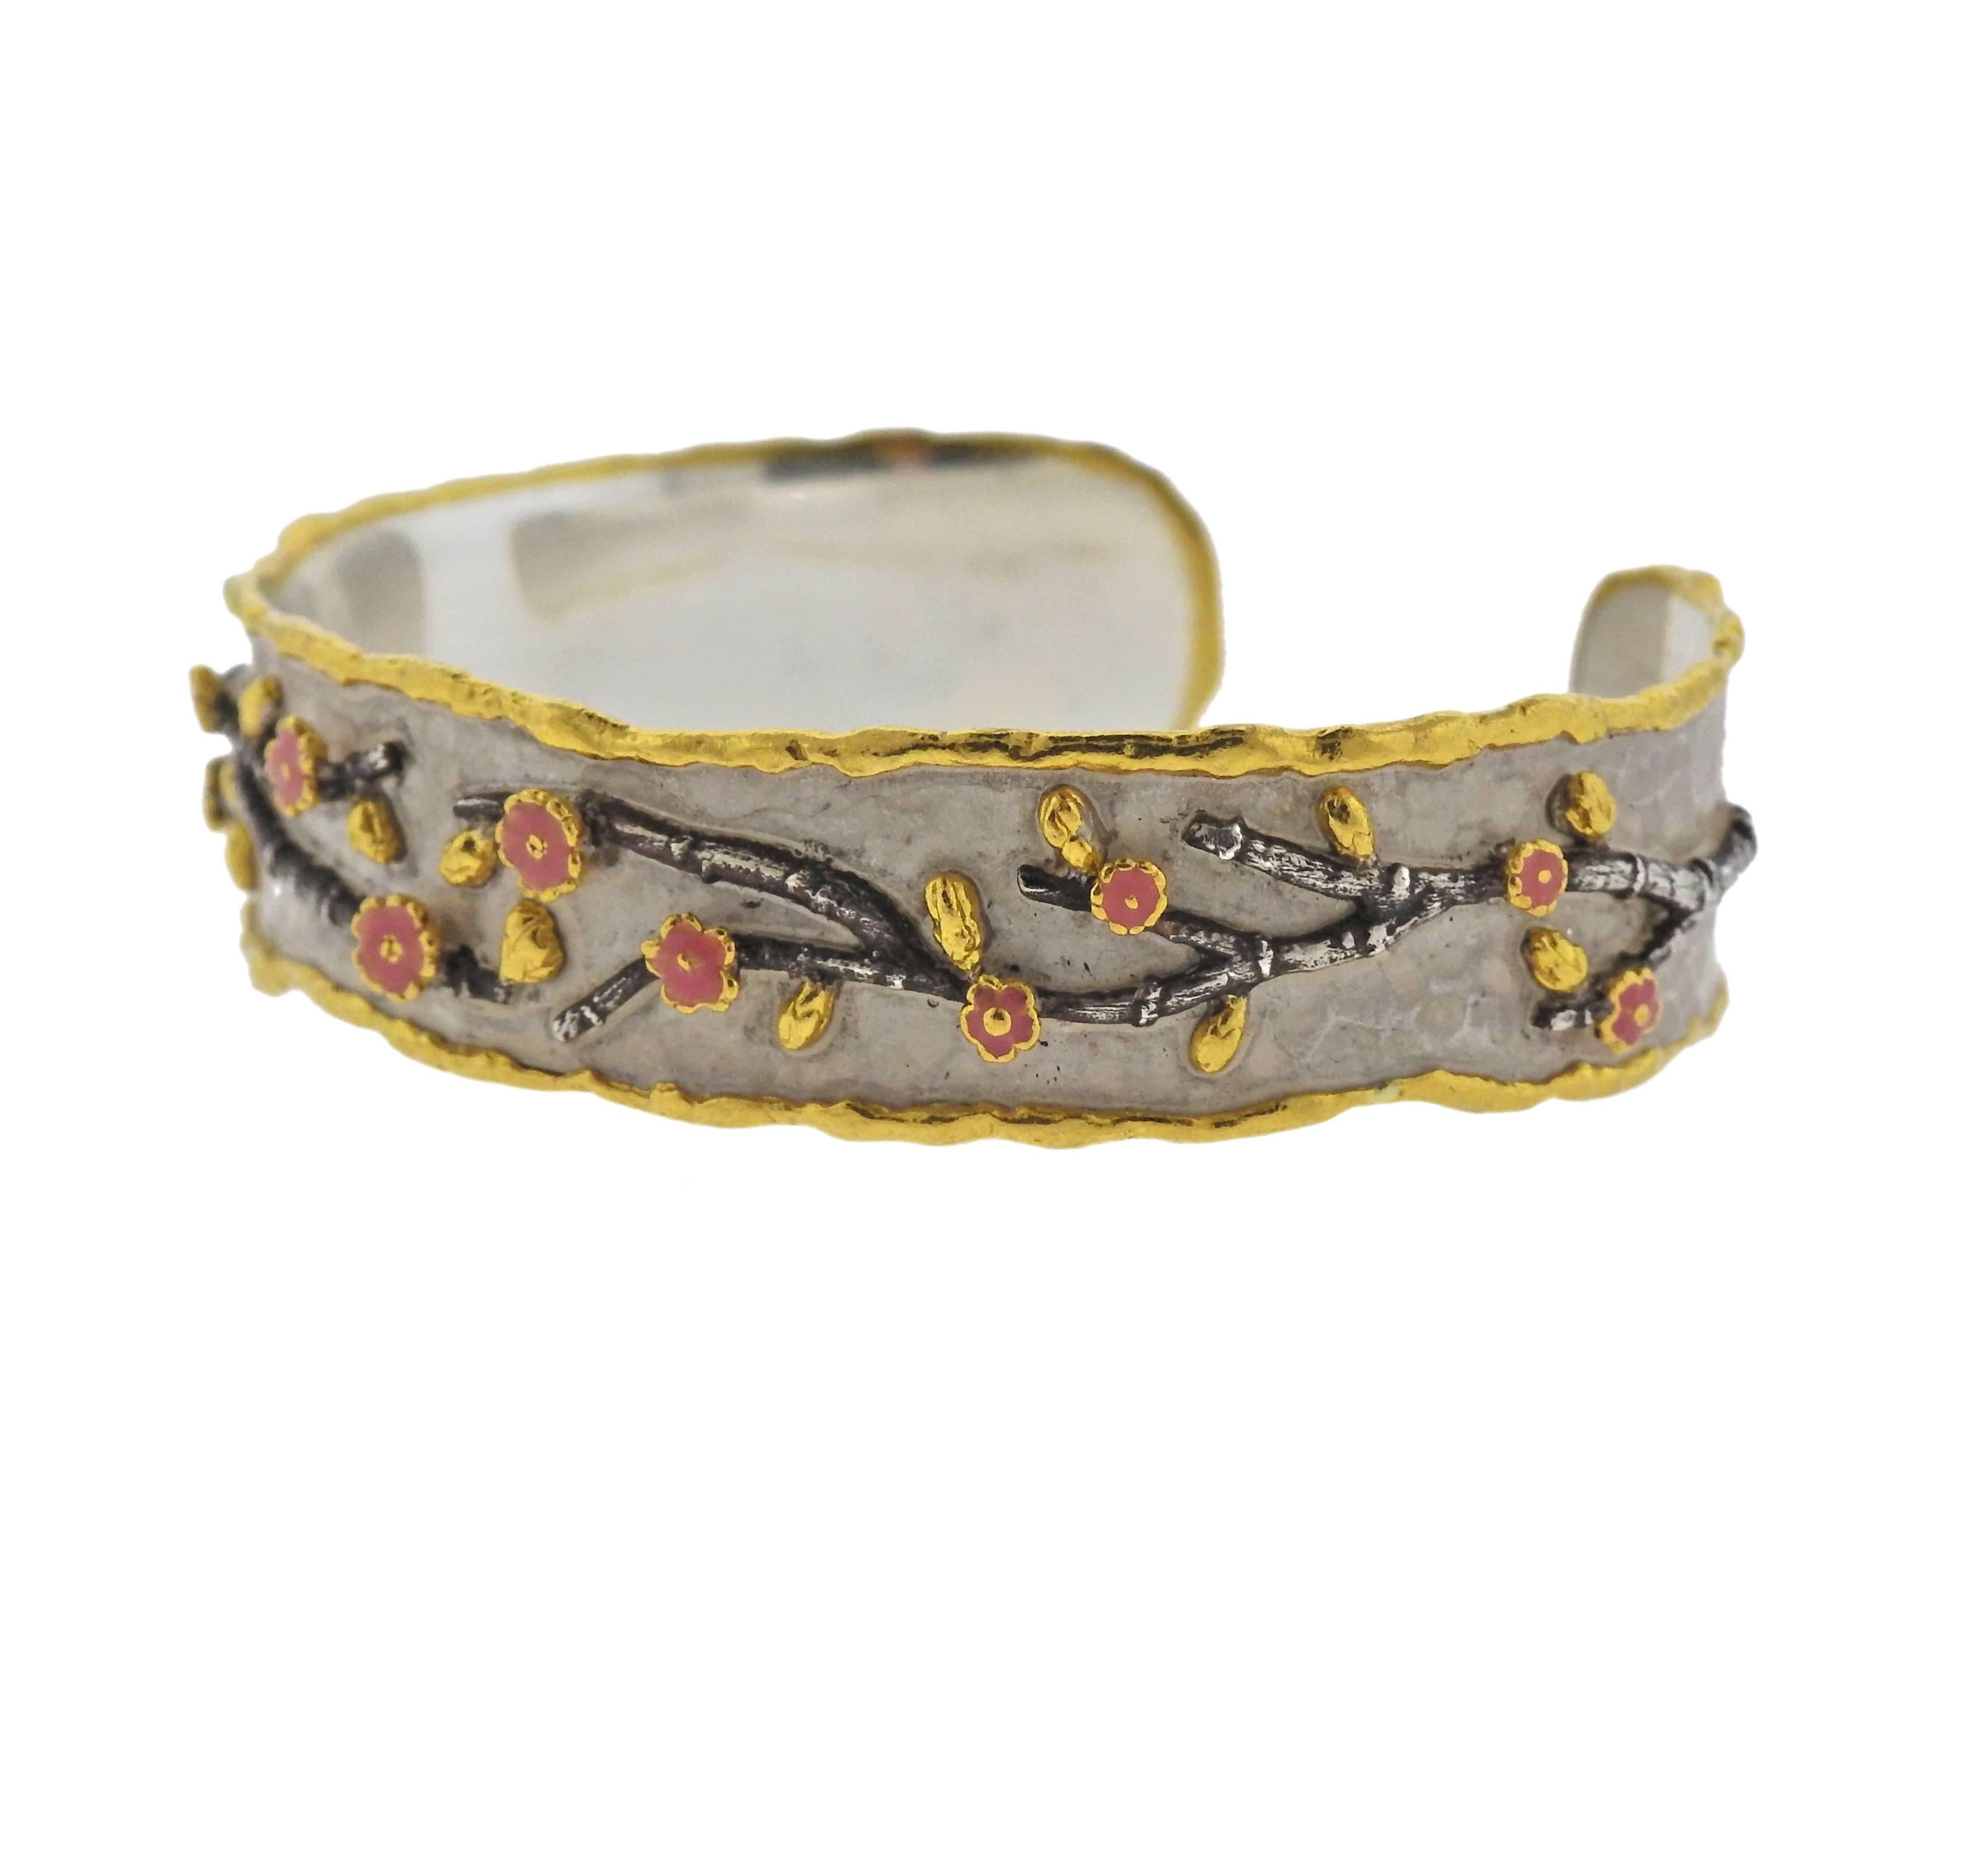 24k gold and silver cuff bracelet by Victor Velyan from Cherry Blossom collection, decorated with enamel. Retail $7400. Bracelet will fit approx. 7